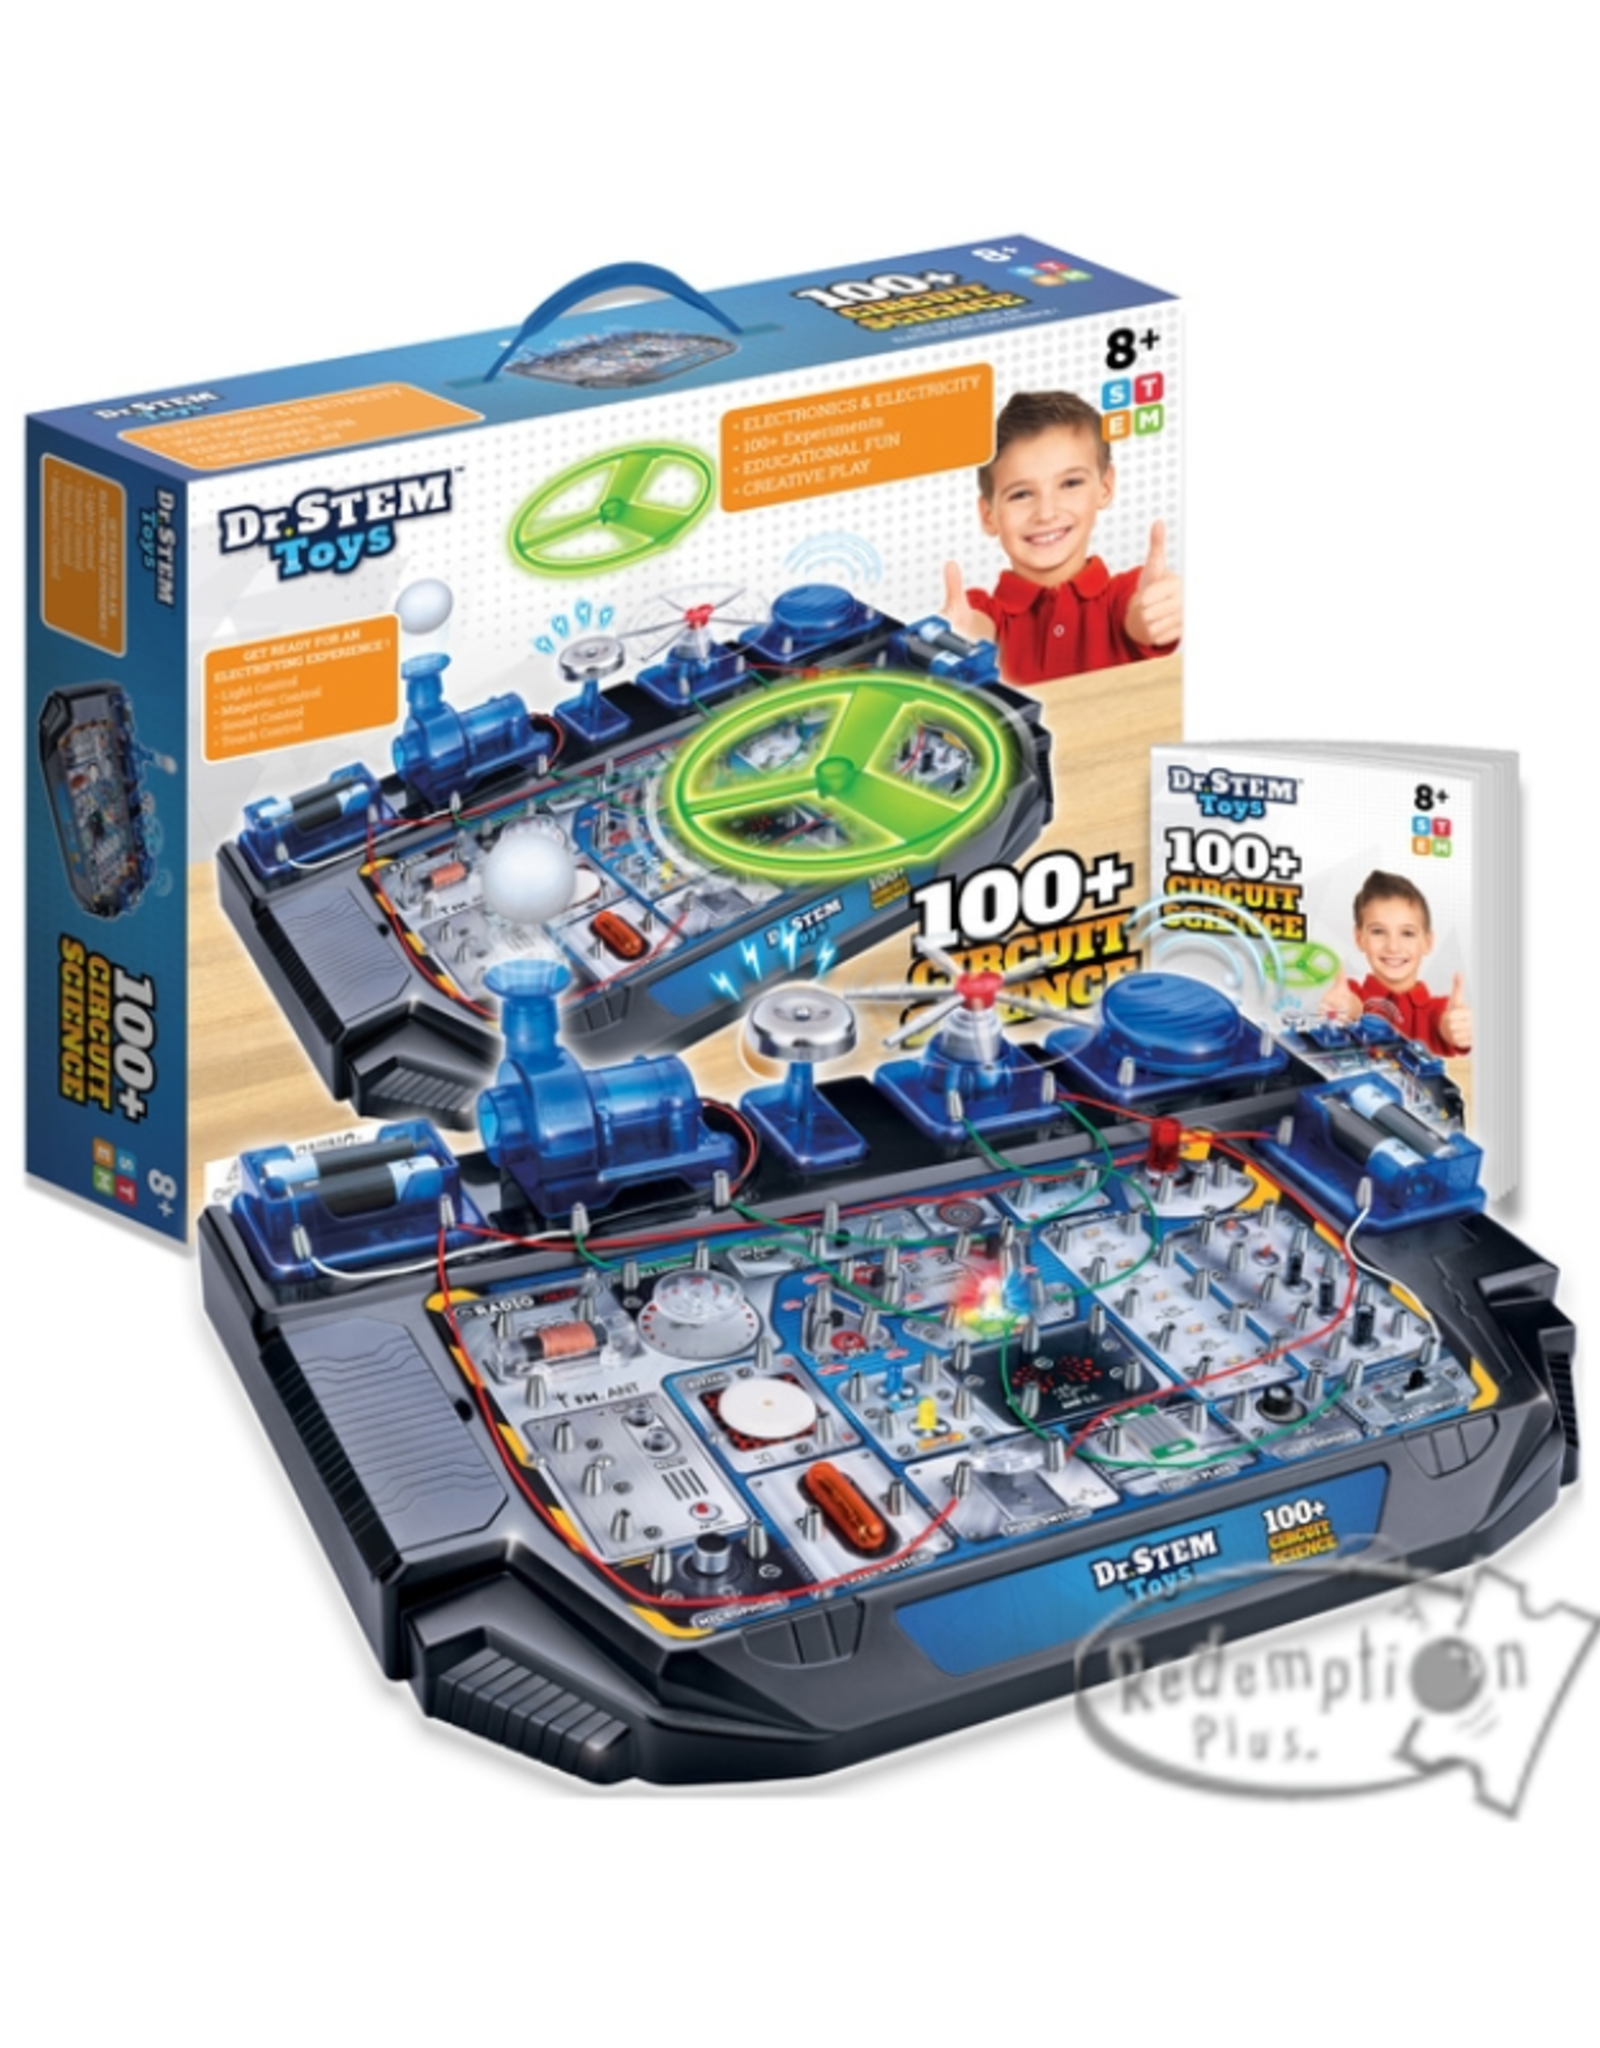 THiN AiR Brands Dr. STEM Toys: Circuit Science 100+